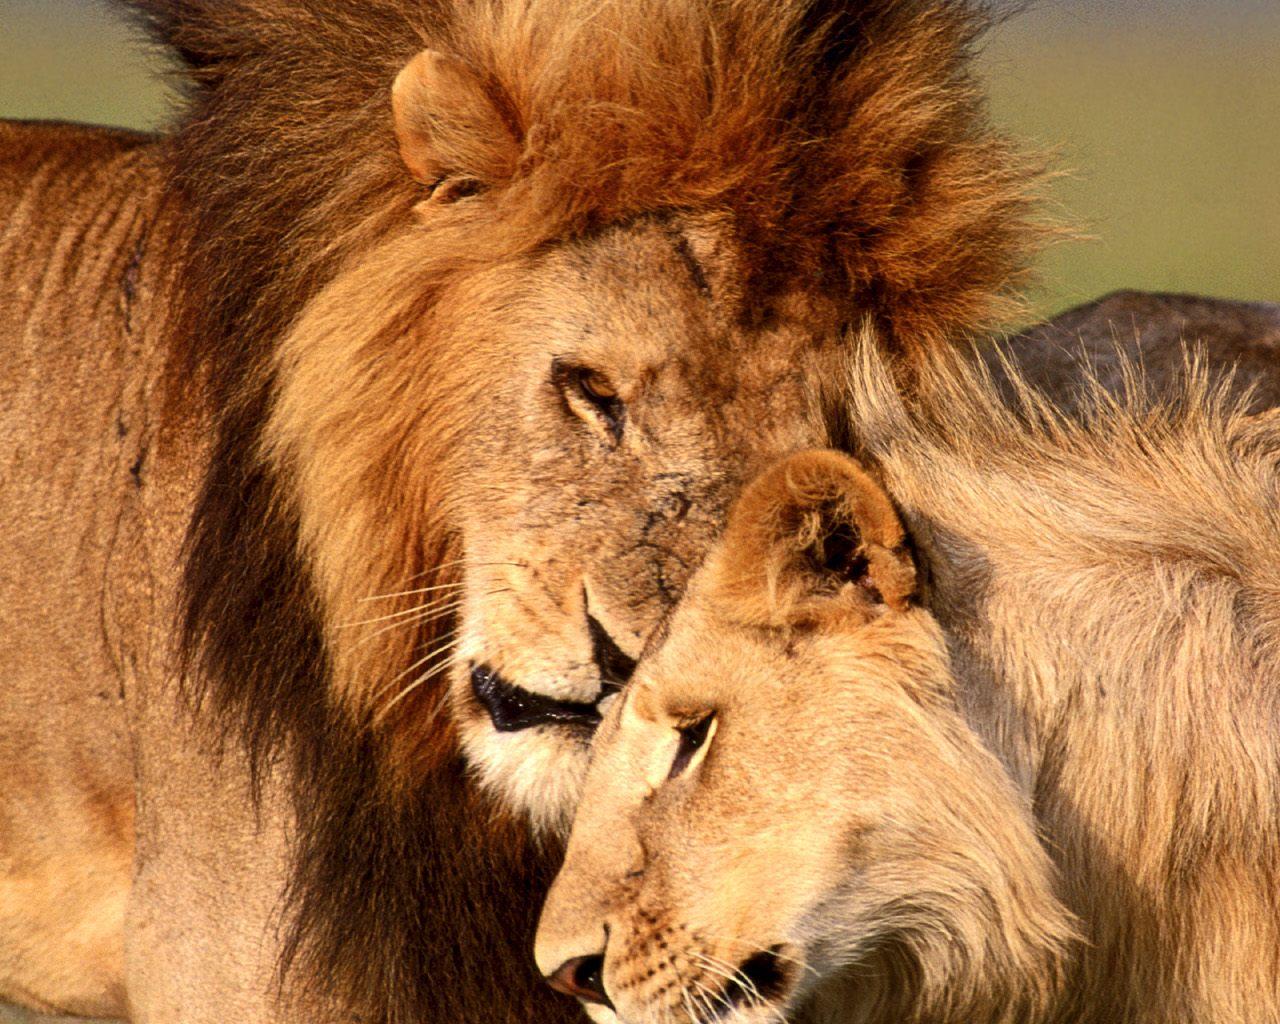 iPhone Lion And Lioness Love Wallpaper